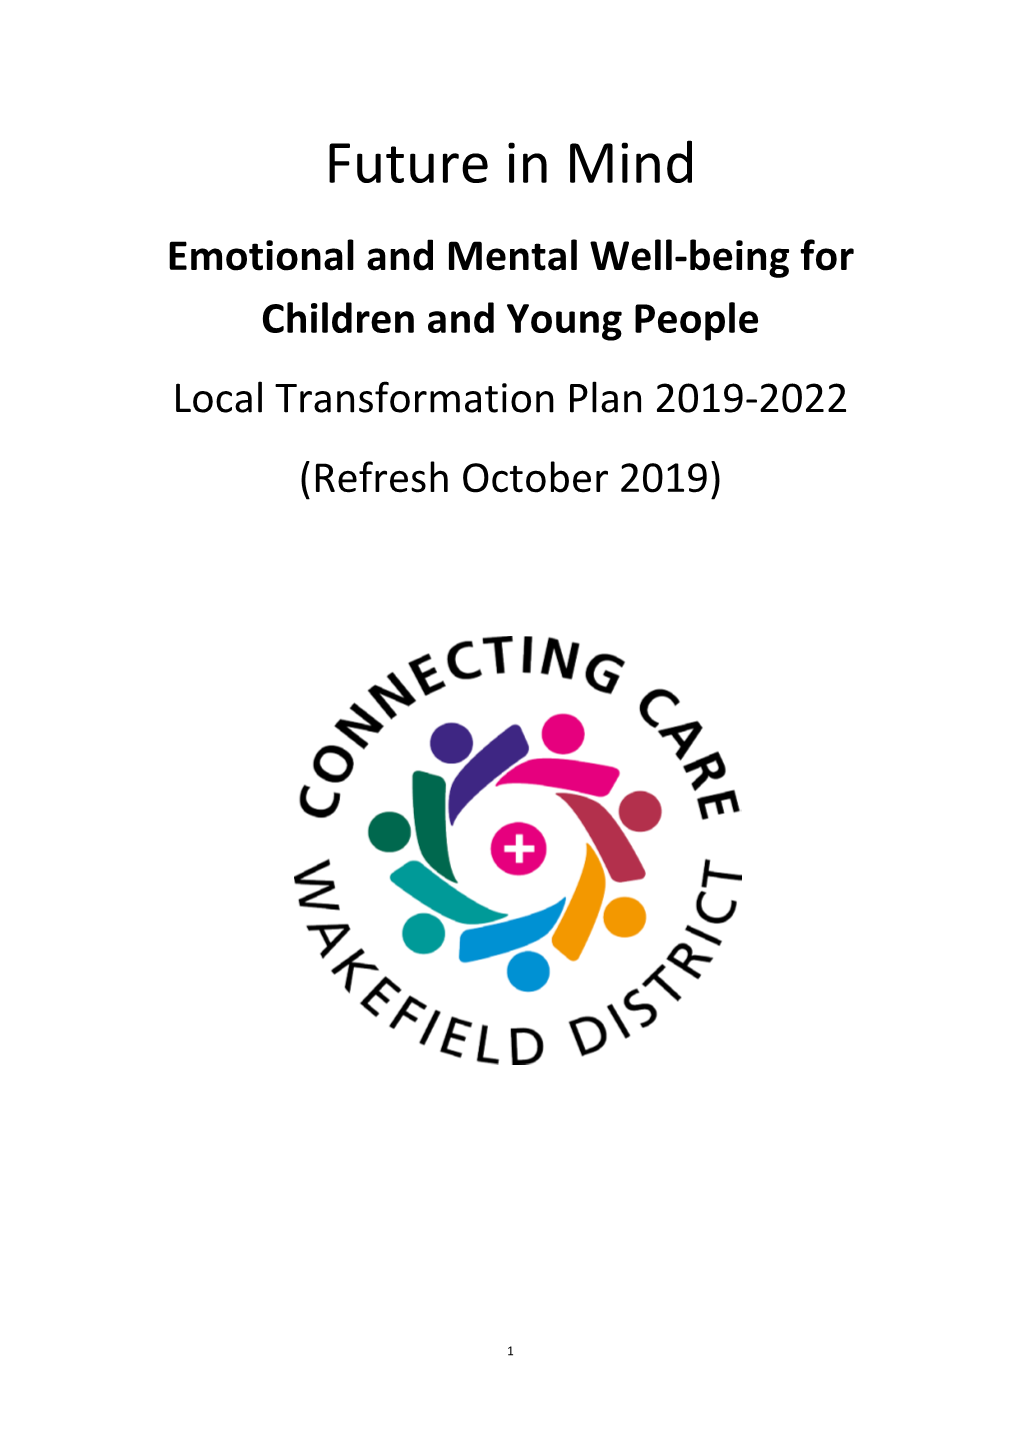 Future in Mind Emotional and Mental Well-Being for Children and Young People Local Transformation Plan 2019-2022 (Refresh October 2019)